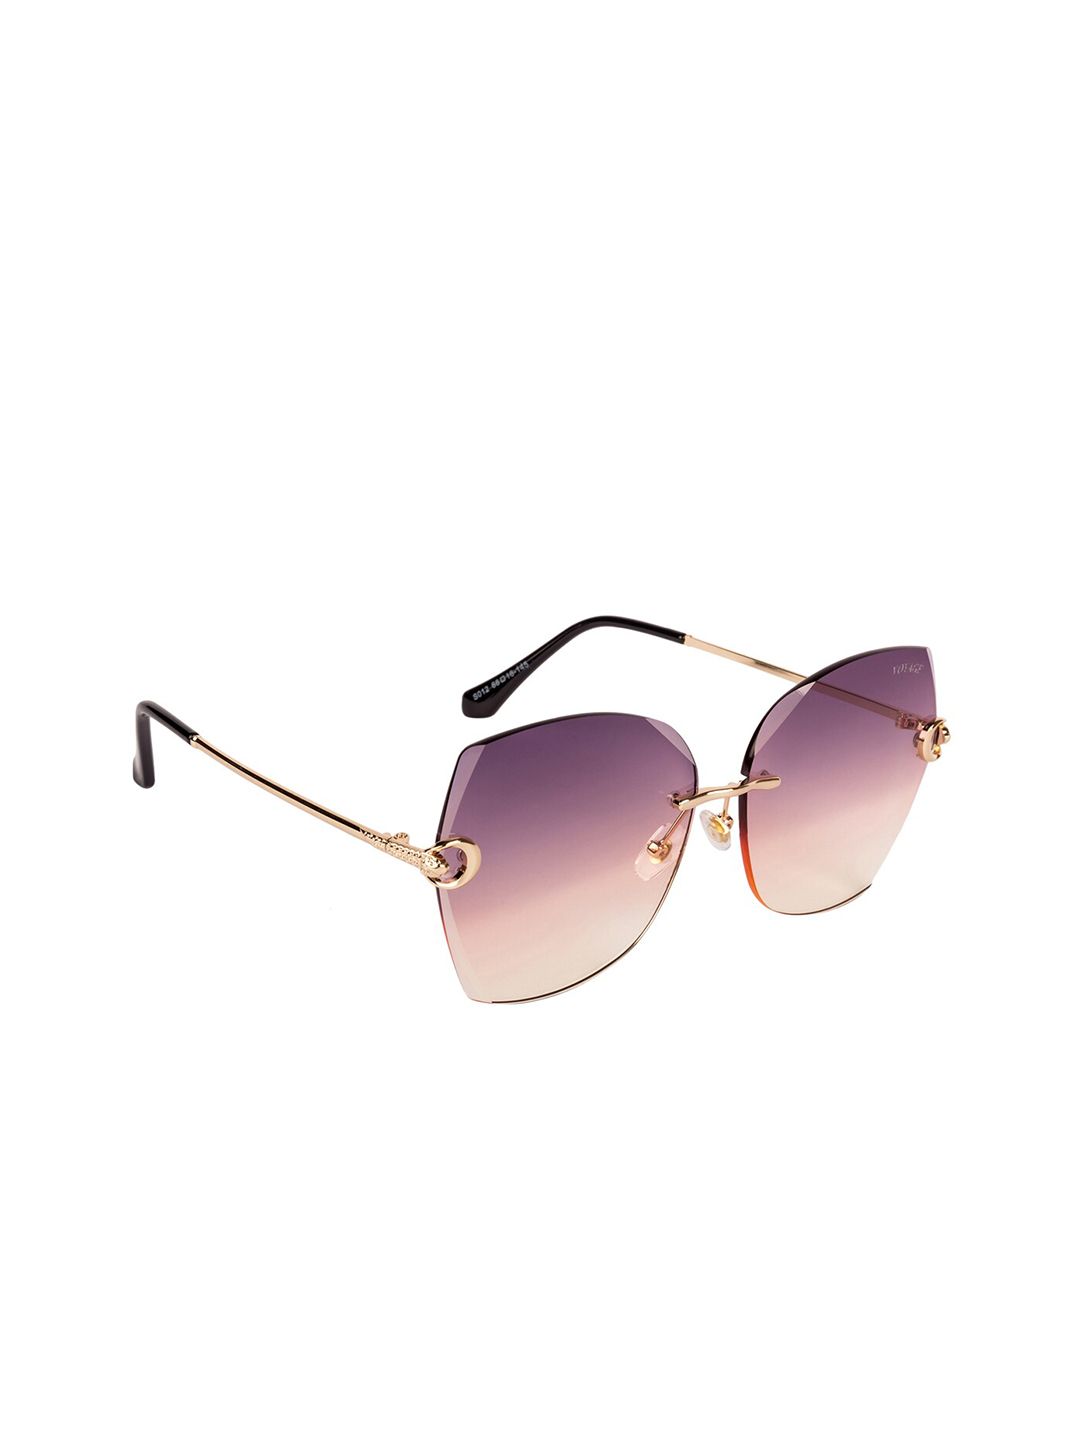 Voyage Women Purple Lens & Gold-Toned Square Sunglasses with UV Protected Lens S012MG2878C Price in India